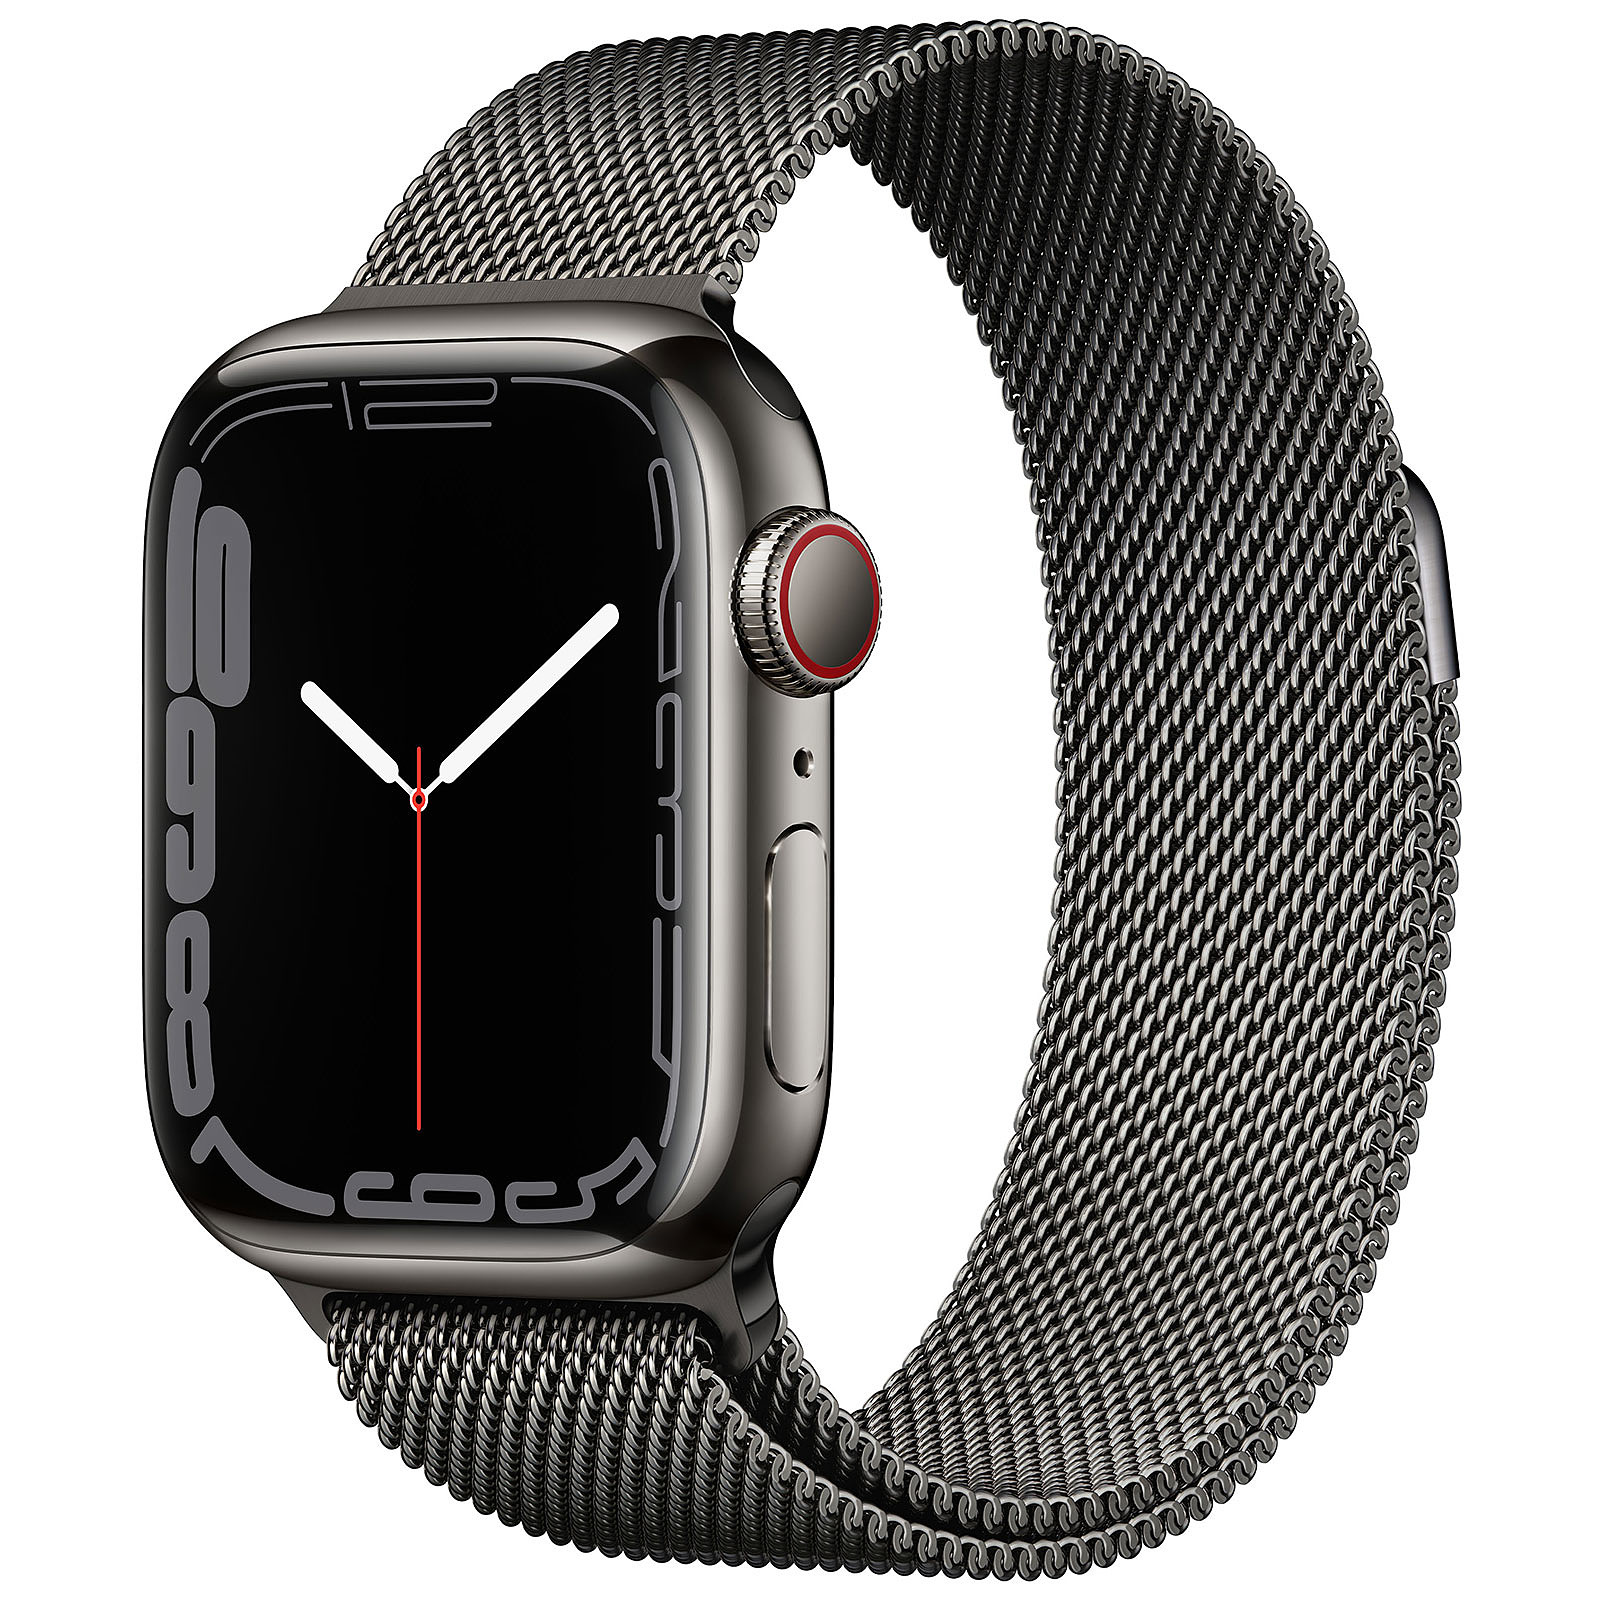 Apple Watch Series 7 GPS + Cellular Graphite Stainless Graphite Bracelet Milanese 41 mm - Montre connectee Apple